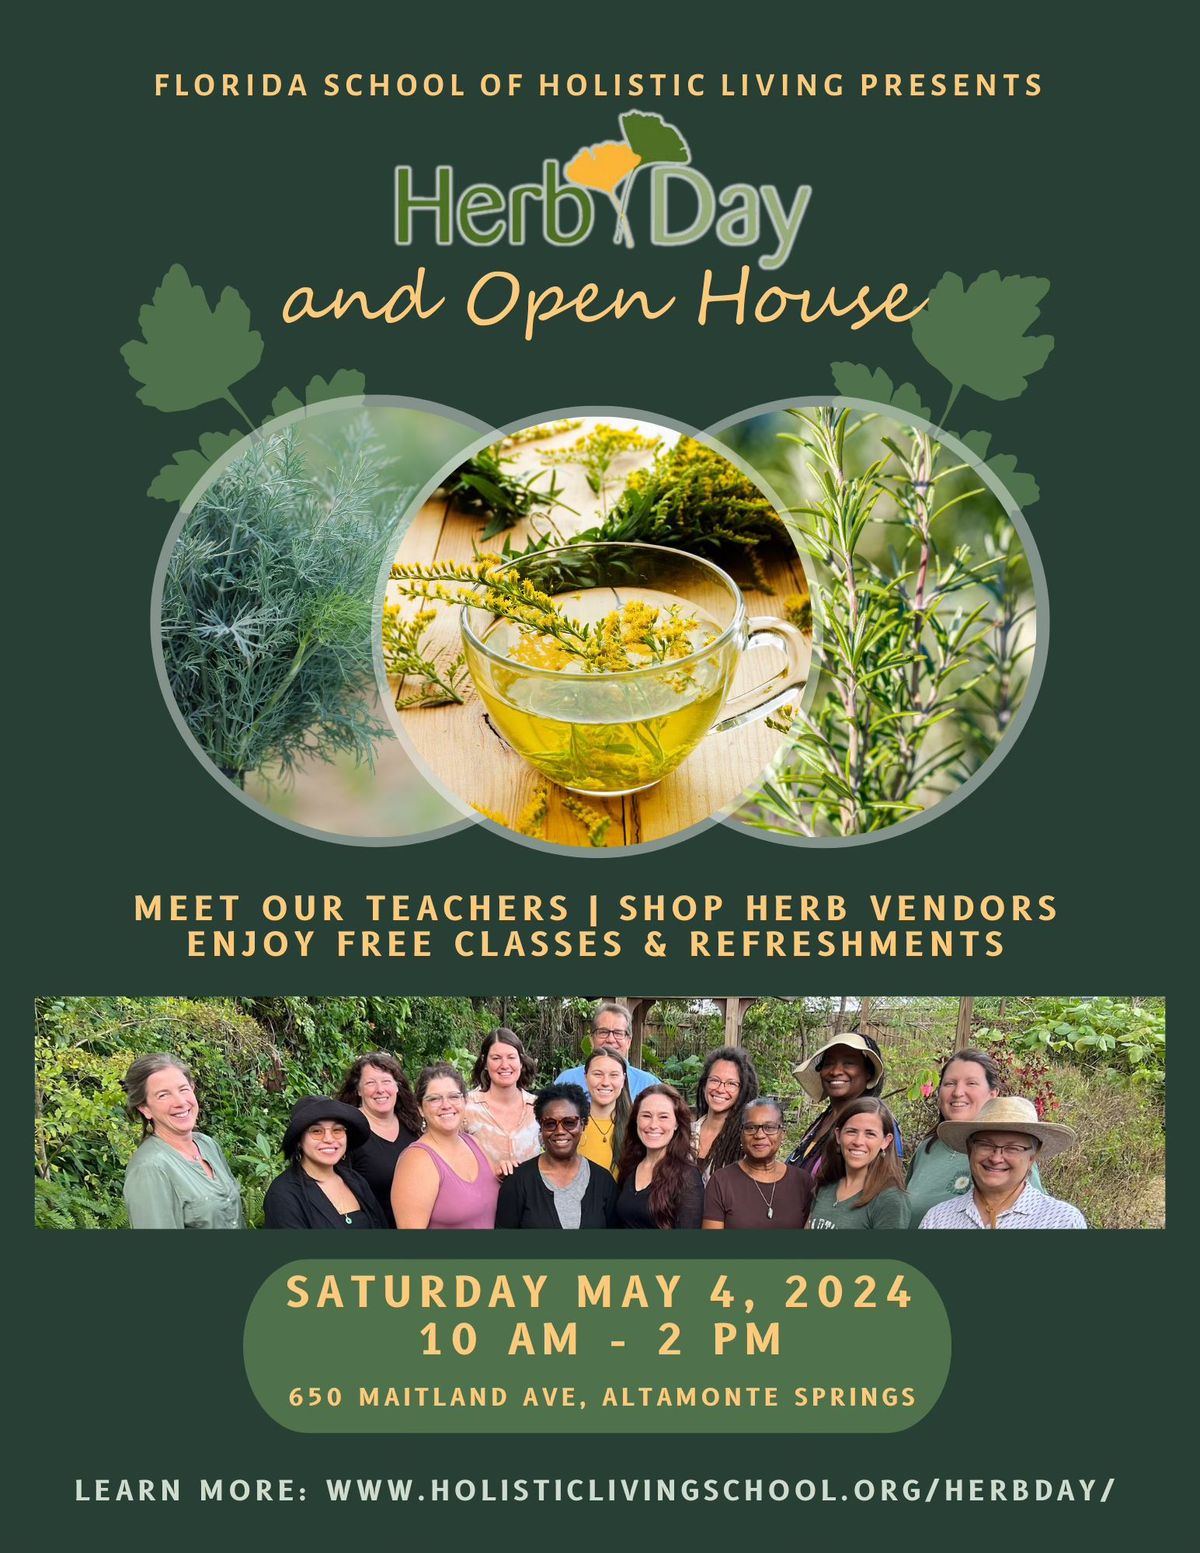 FSHL HERB DAY AND OPEN HOUSE - MAY 4, 2024